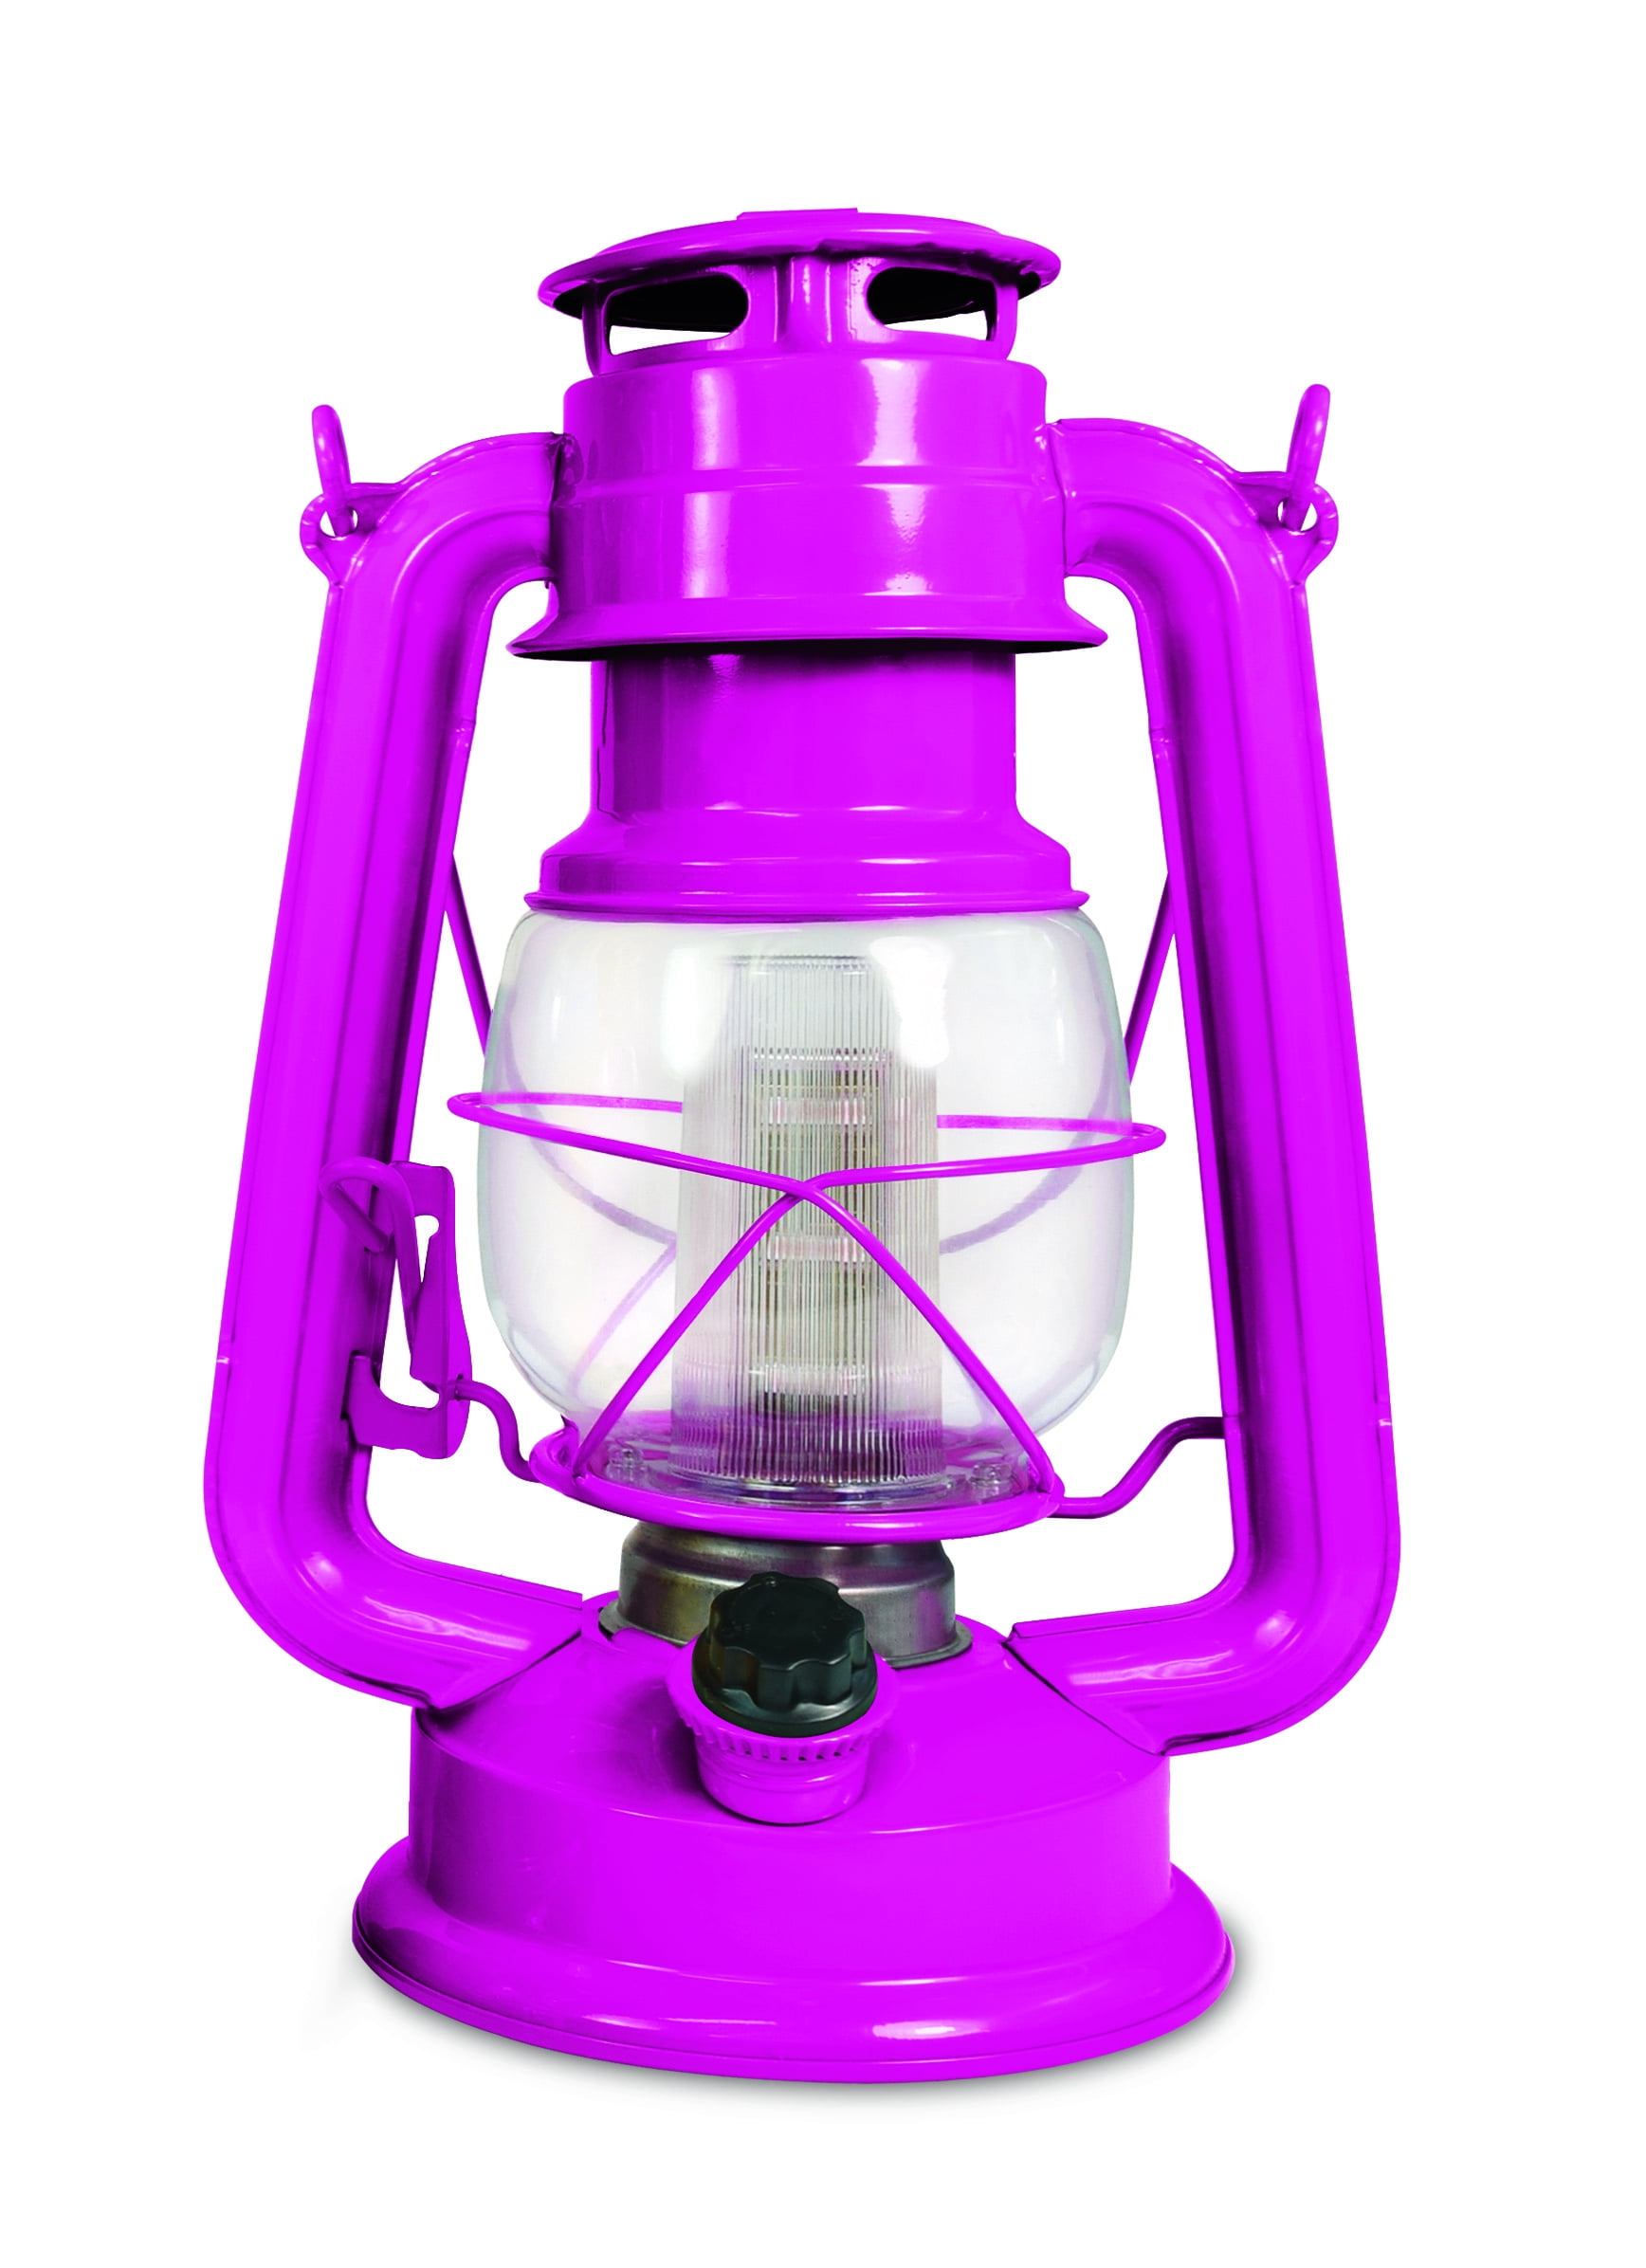 12' Magenta Battery Operated LED Paper Lanterns